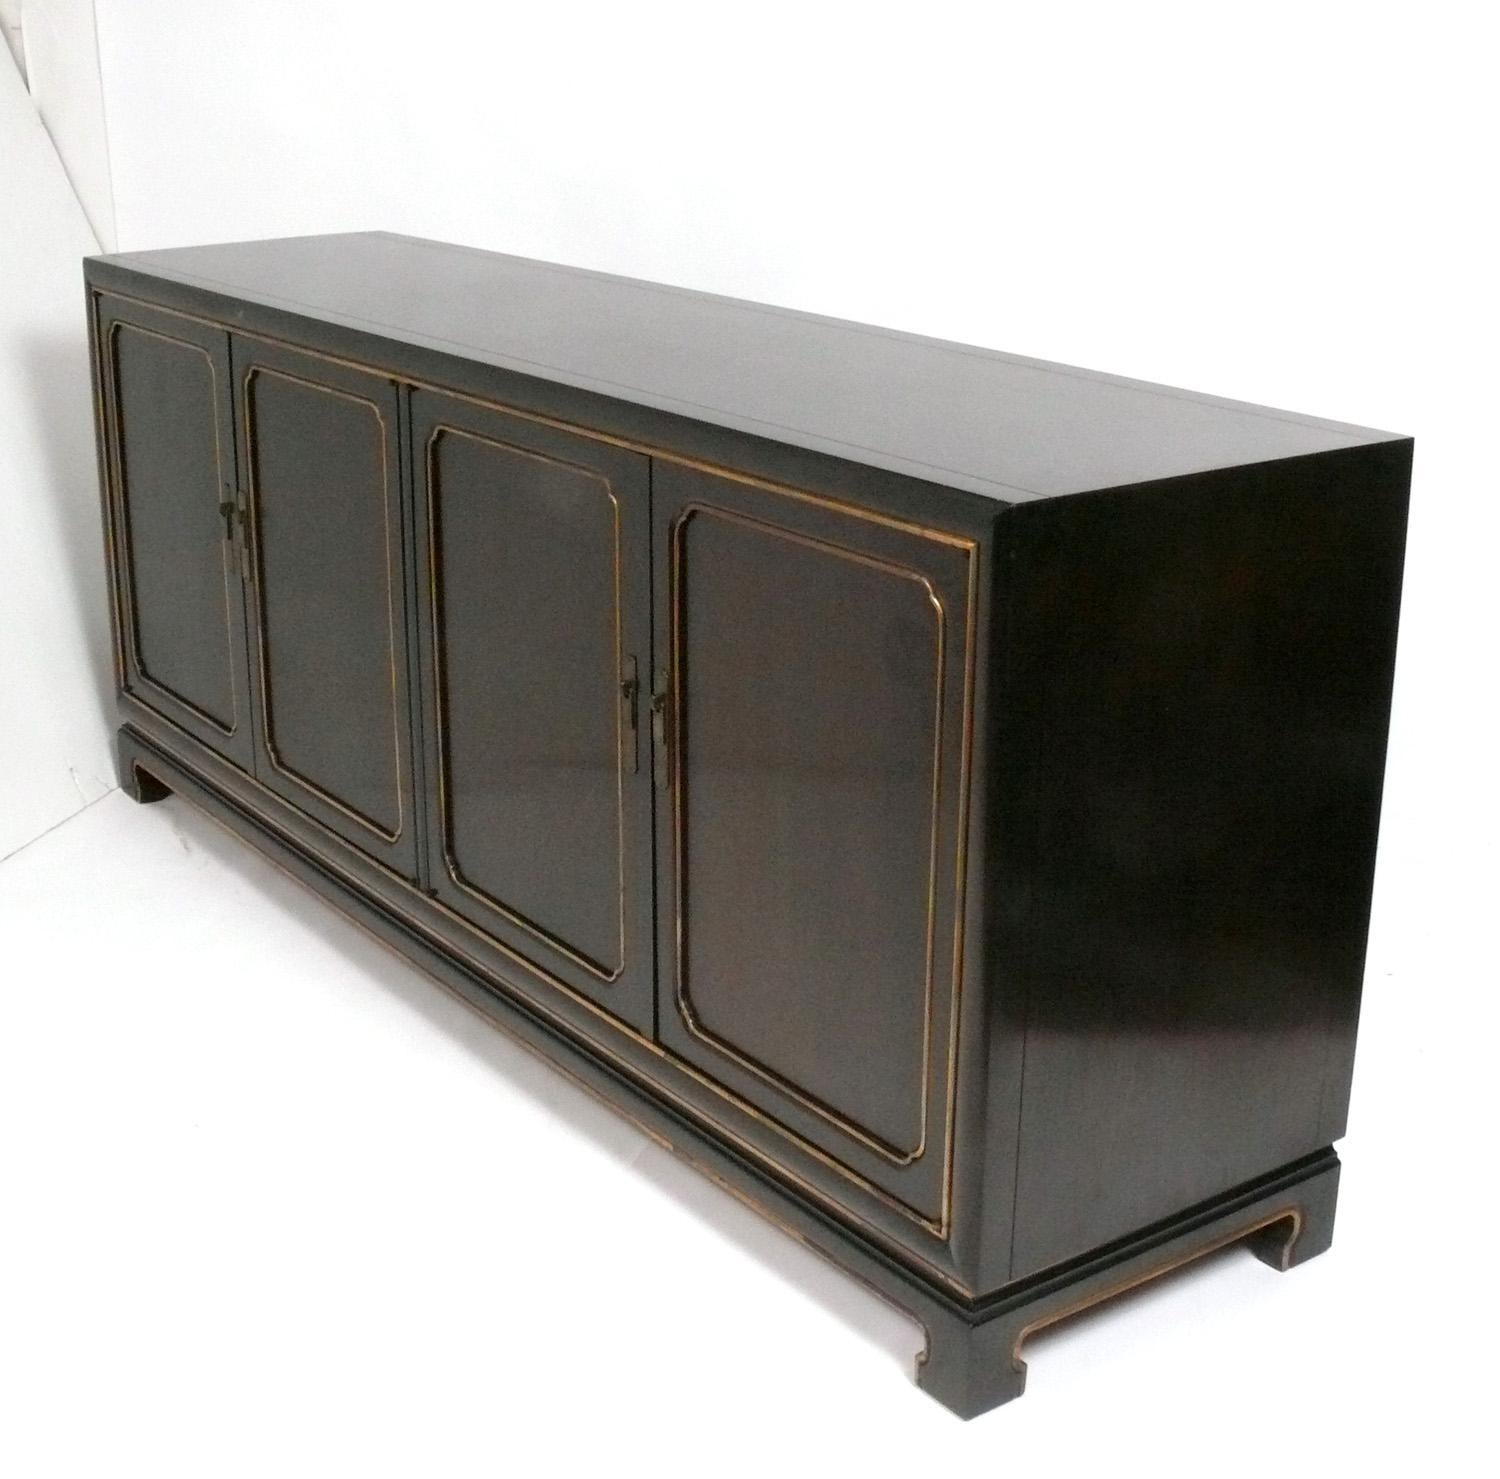 Asian Influenced Mid Century Credenza, designed for the John Widdicomb Company, American, circa 1960s. Subtle Asian influenced design executed in a deep espresso brown color with gold trim and patinated brass hardware. It offers a voluminous amount